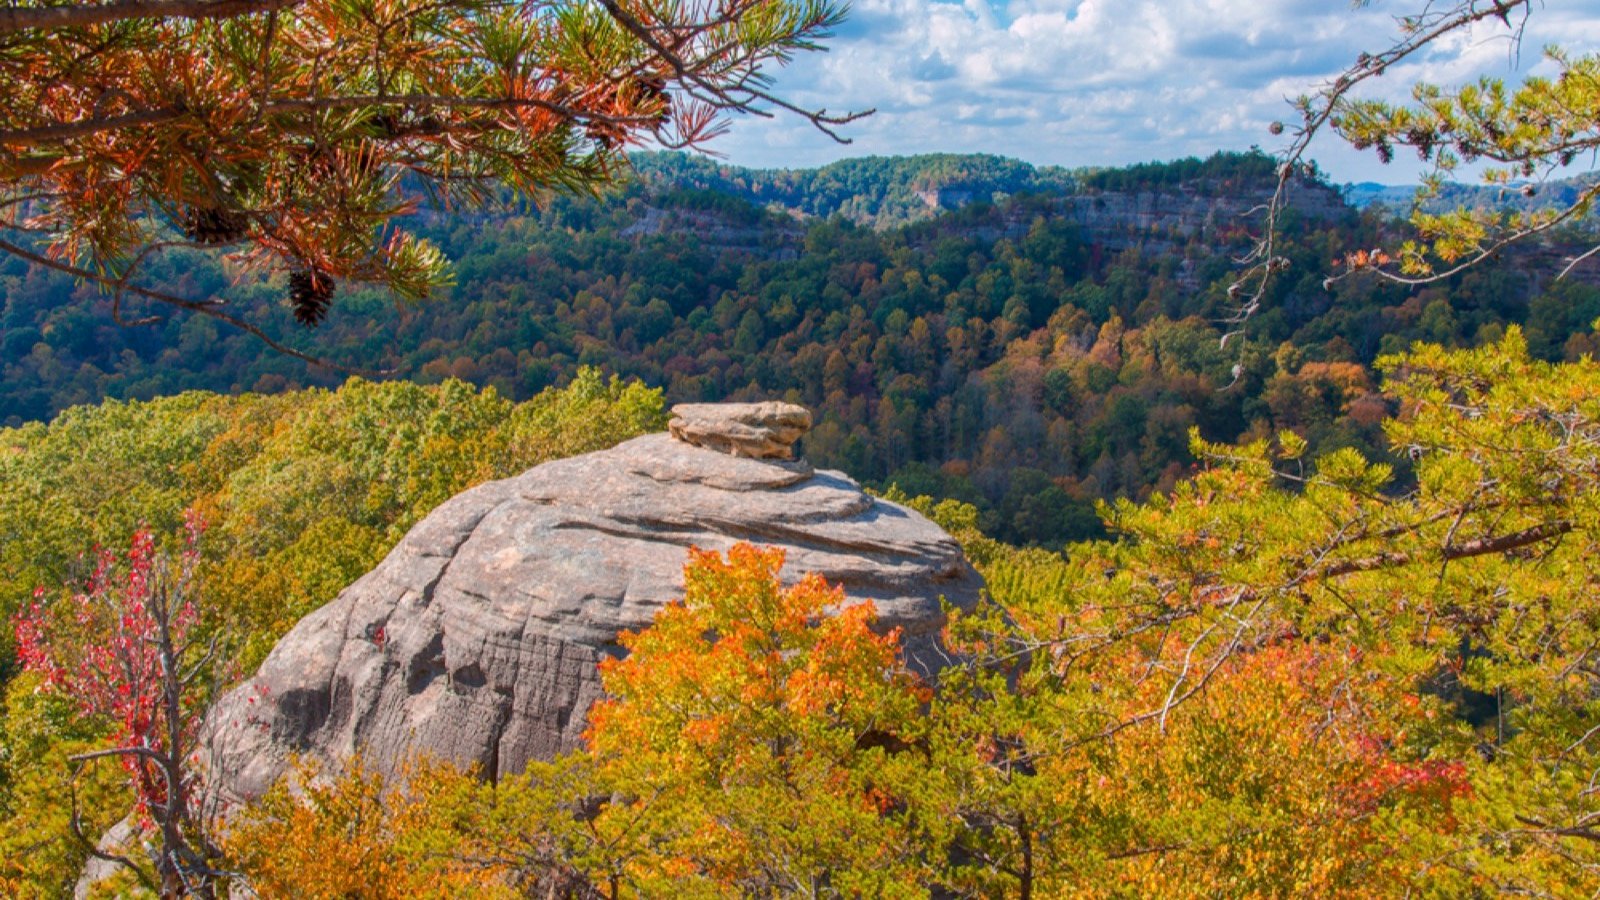 <p>The Daniel Boone National Forest in Winchester is an enormous 2.1 million-acre forest. The park has over 1 million visitors yearly and is open to everyone who enjoys outdoor activities, such as camping, fishing, hiking, rock climbing, boating, hunting, and more.</p><p>The Daniel Boone Forest offers rugged terrain, including narrow ravines, steep forest slopes, and sandstone cliffs. For the less adventurous, there are plenty of family-friendly trails for younger children.</p>